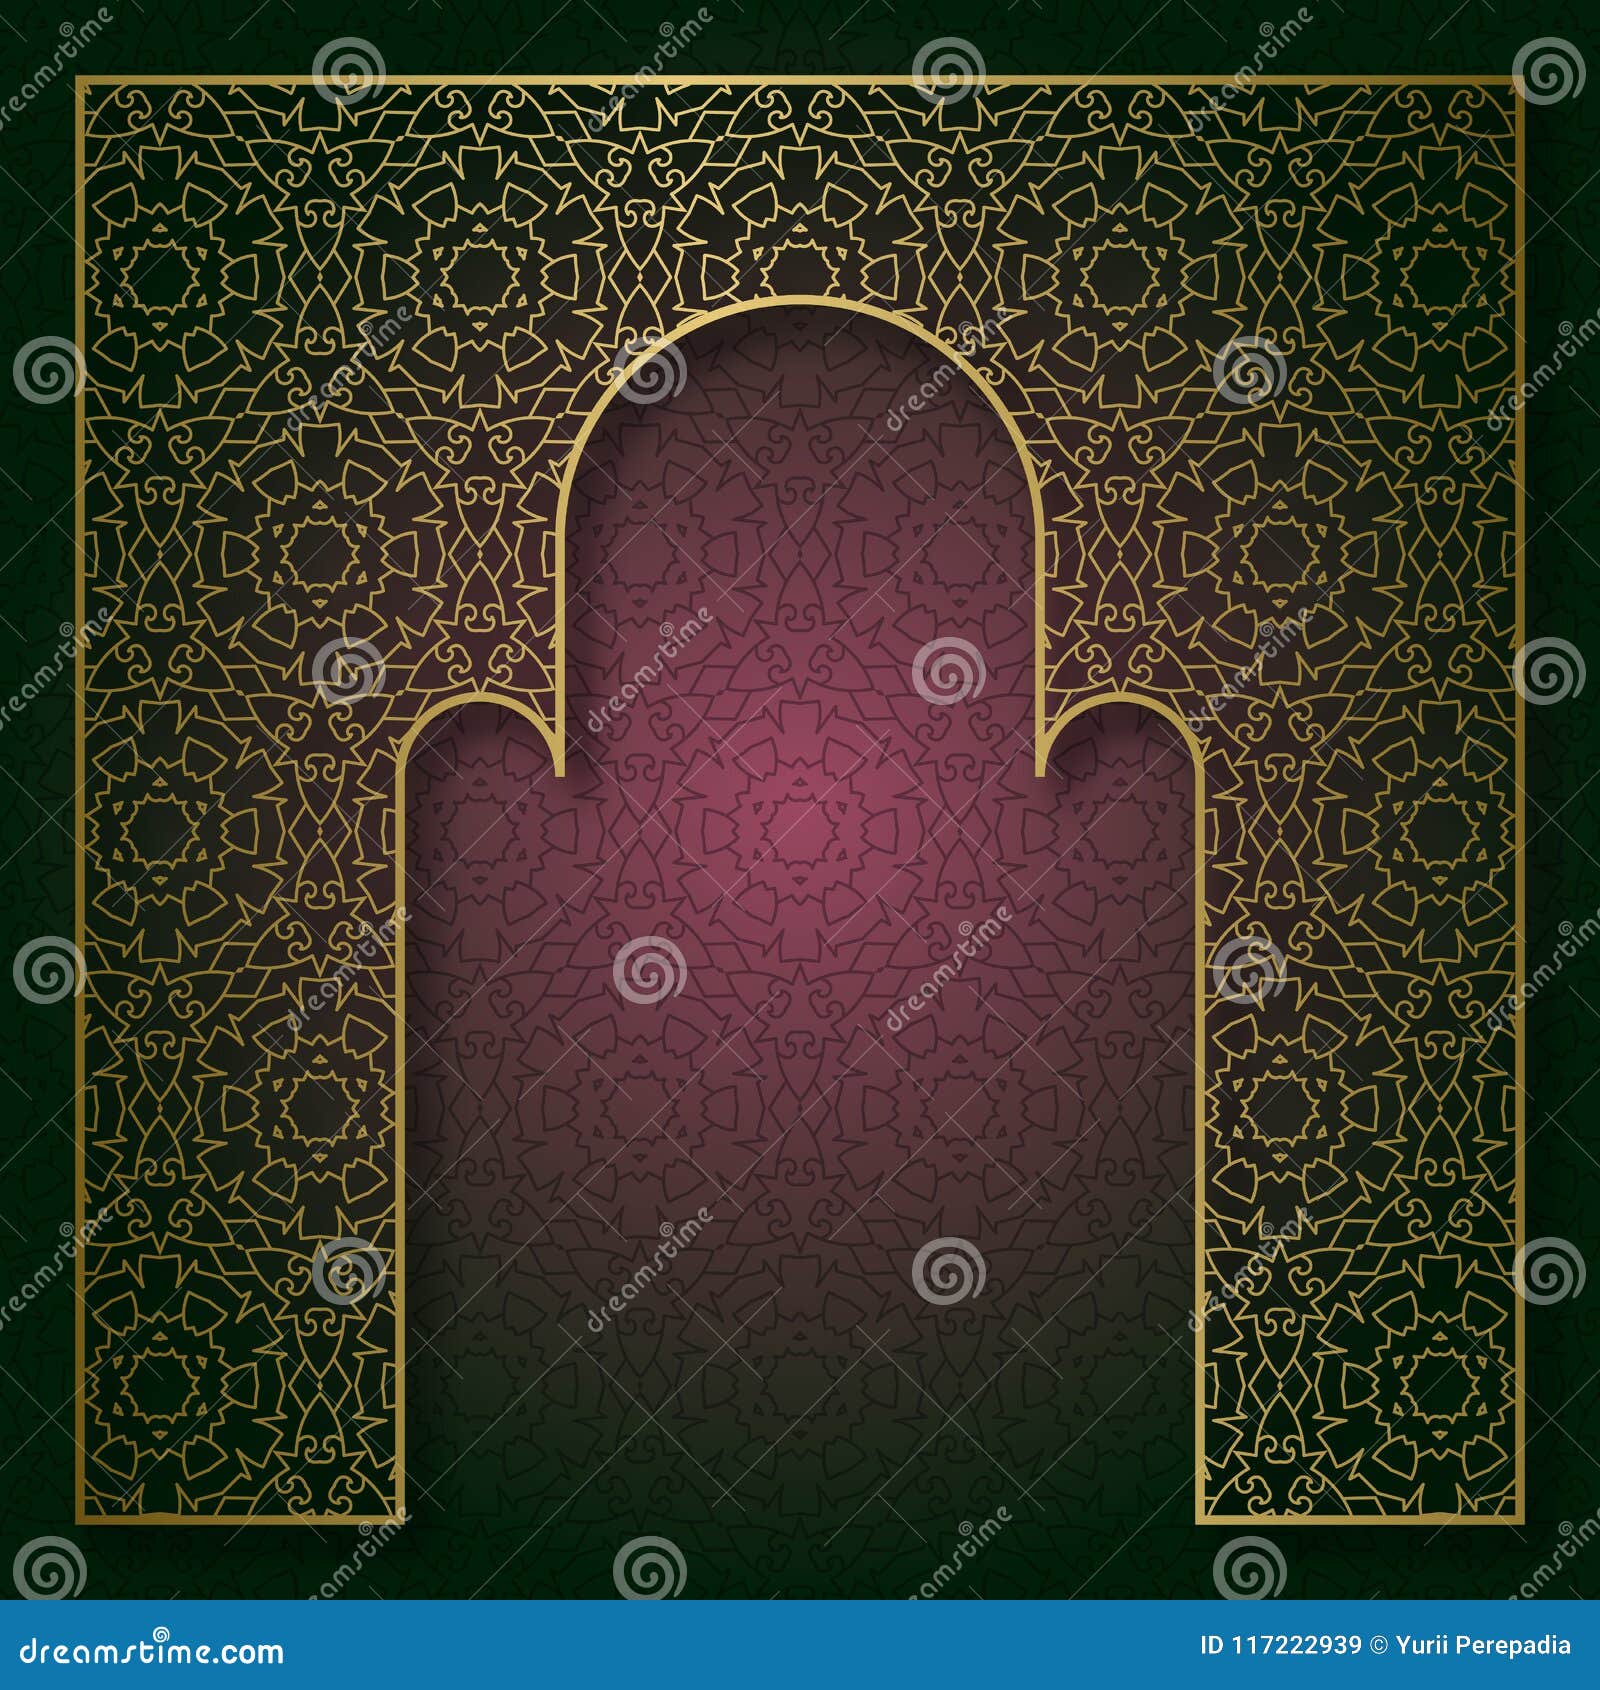 Traditional Patterned Background With Golden Arched Frame Stock Vector